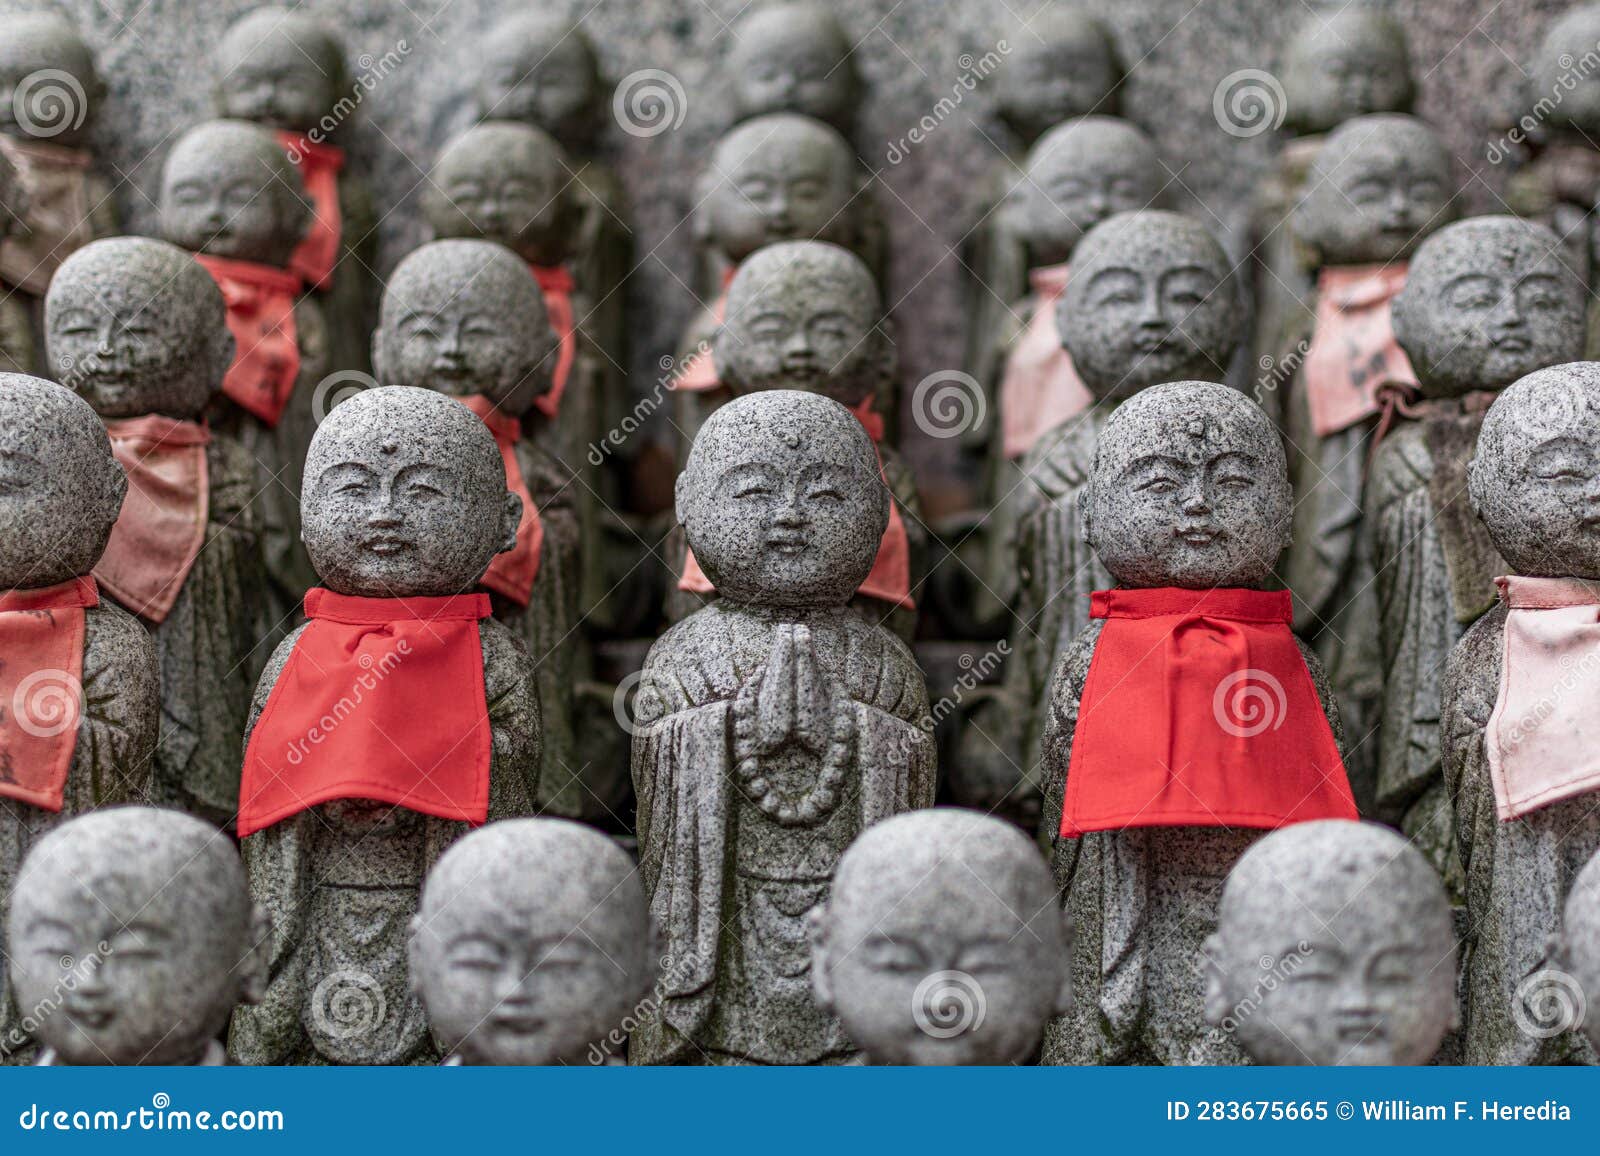 small buddha statues called bodhisattva, in a temple in japan